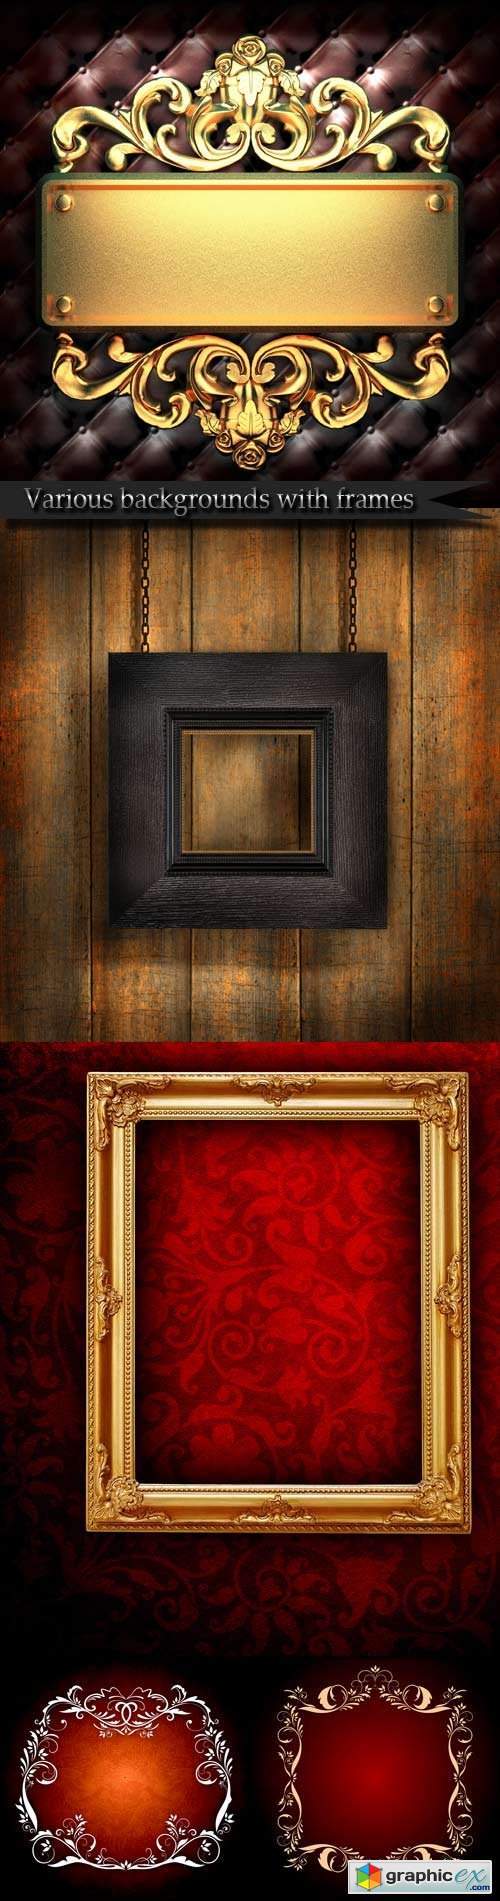 Various backgrounds with frames